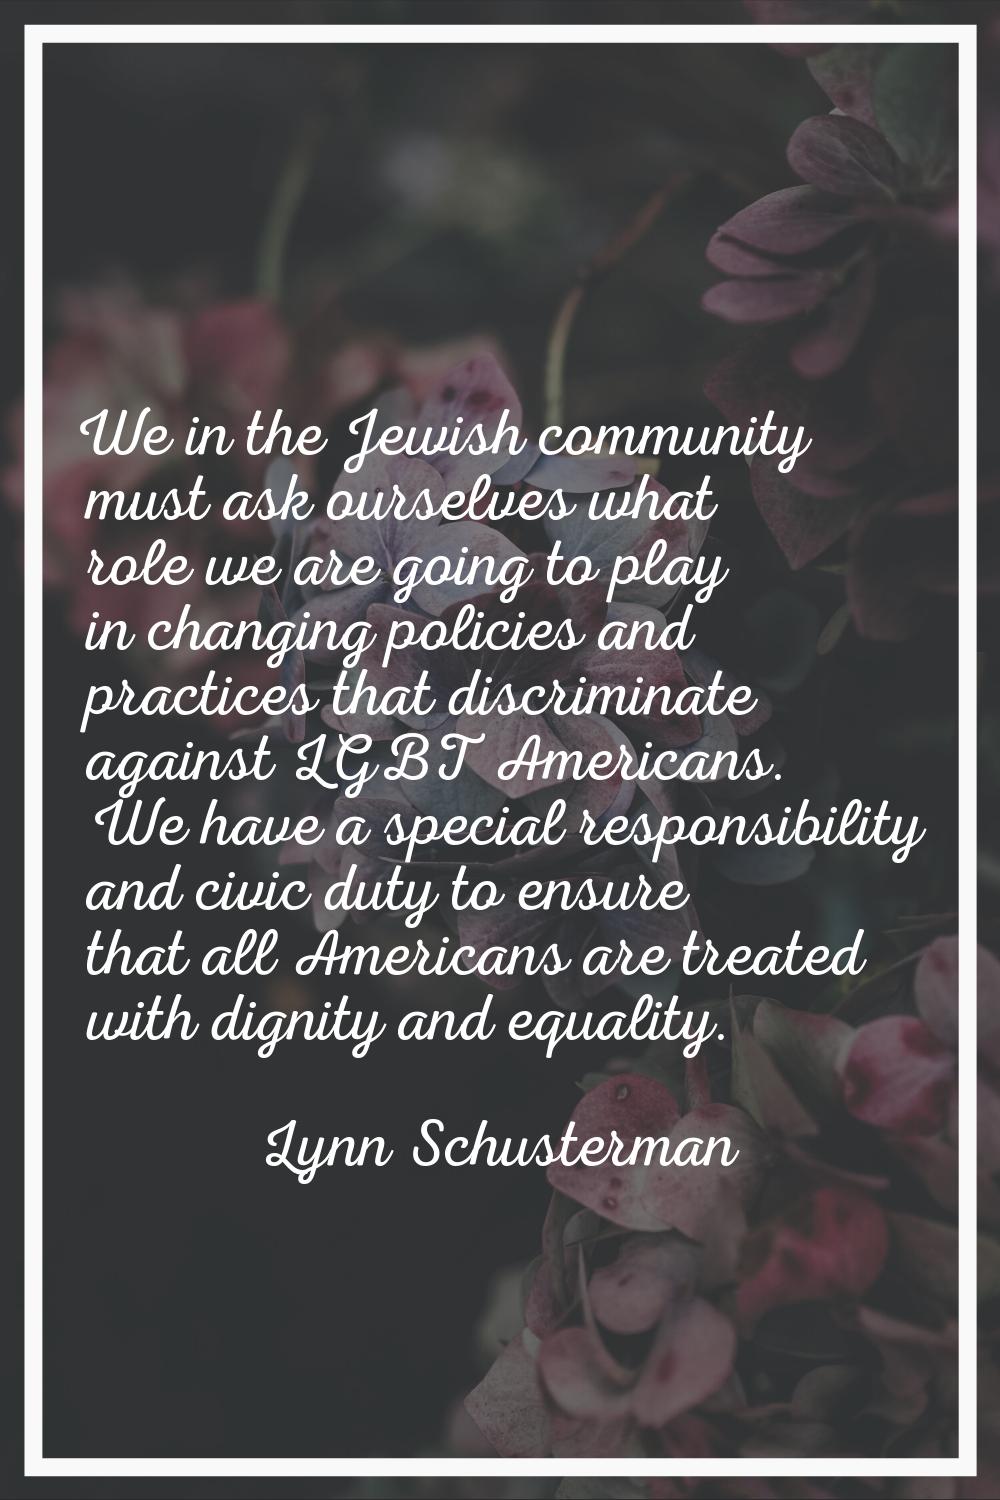 We in the Jewish community must ask ourselves what role we are going to play in changing policies a